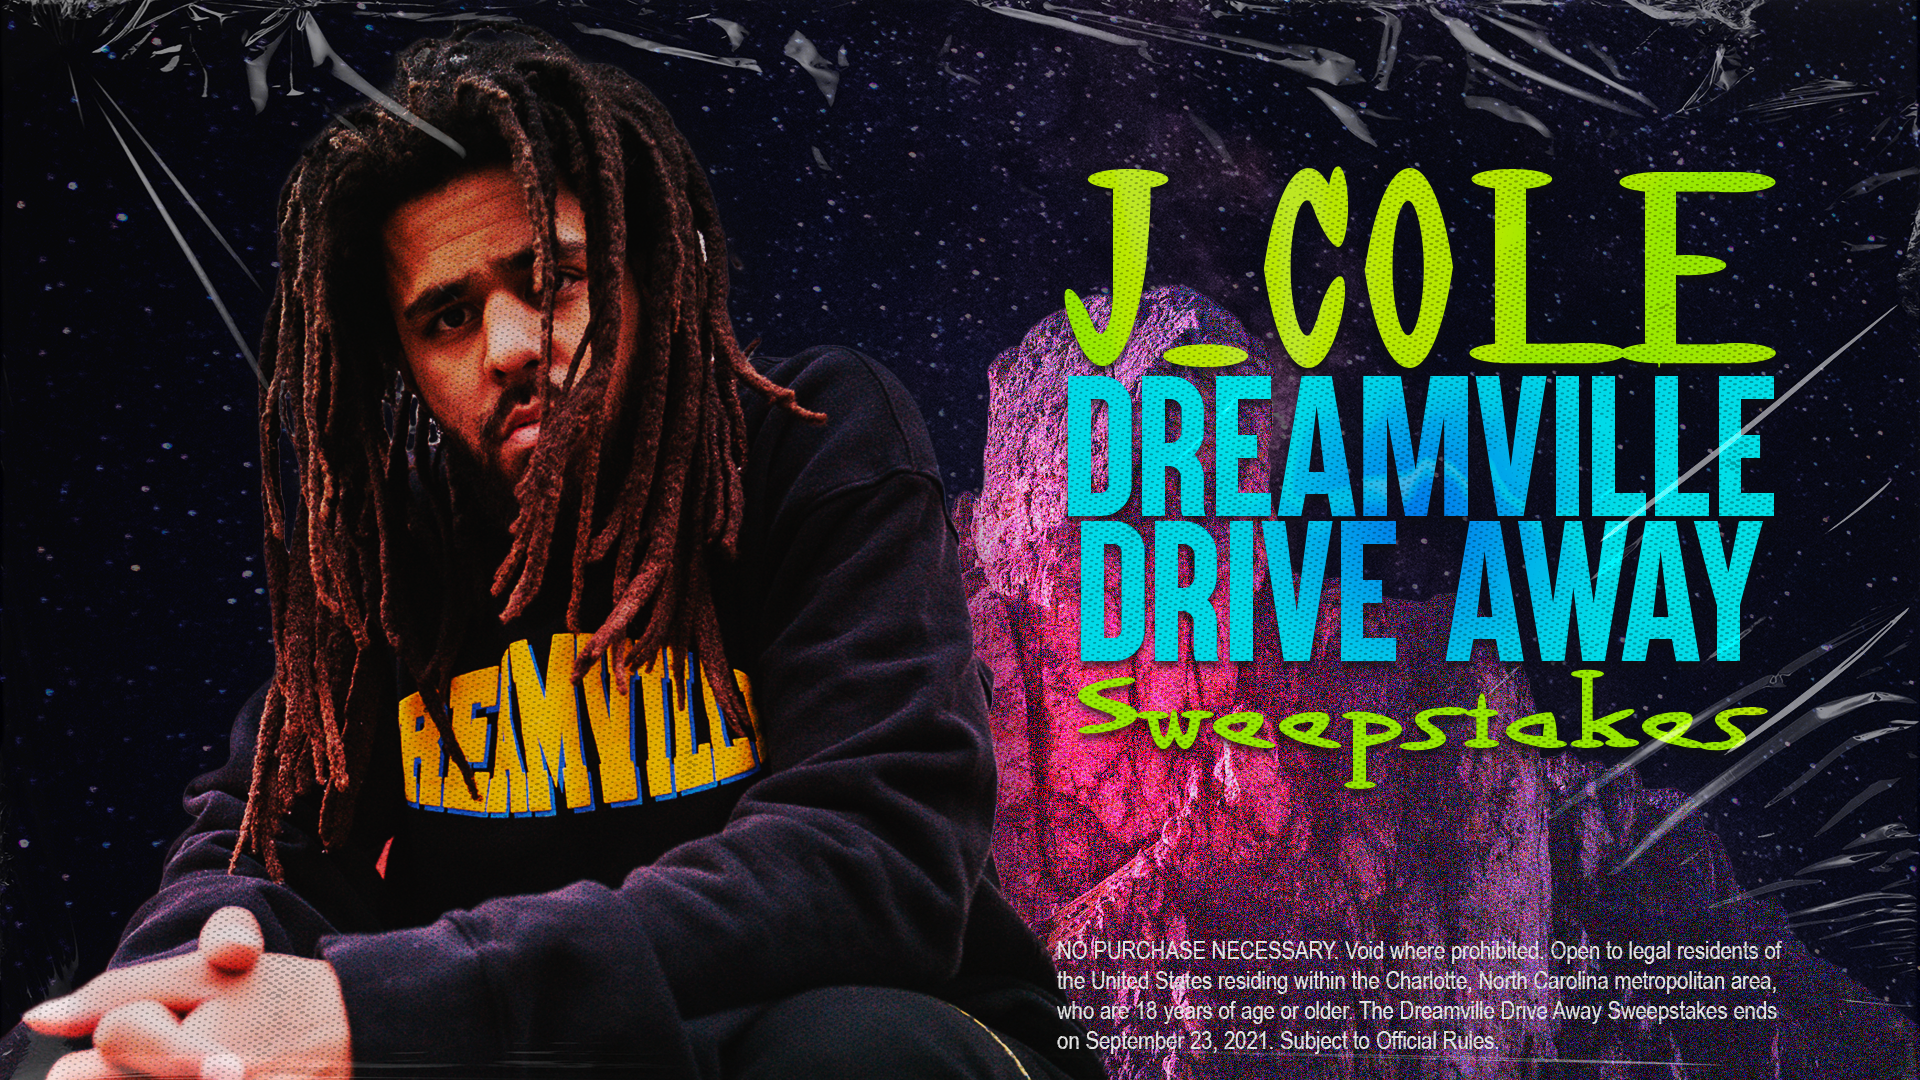 DREAMVILLE DRIVE AWAY SWEEPSTAKES